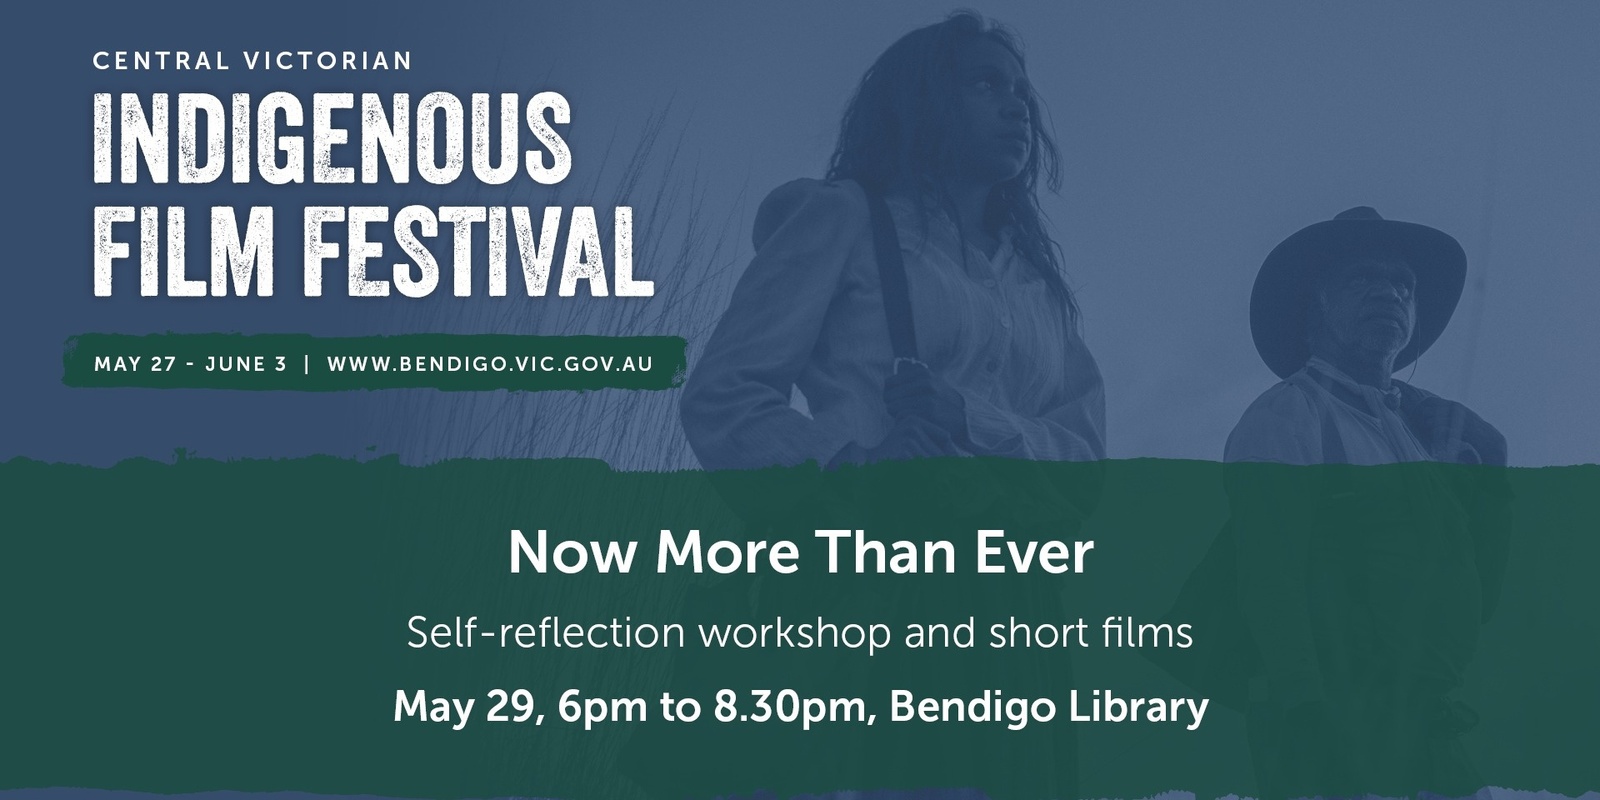 Banner image for Central Victorian Indigenous Film Festival: Now More Than Ever - Self-reflection workshop and short films